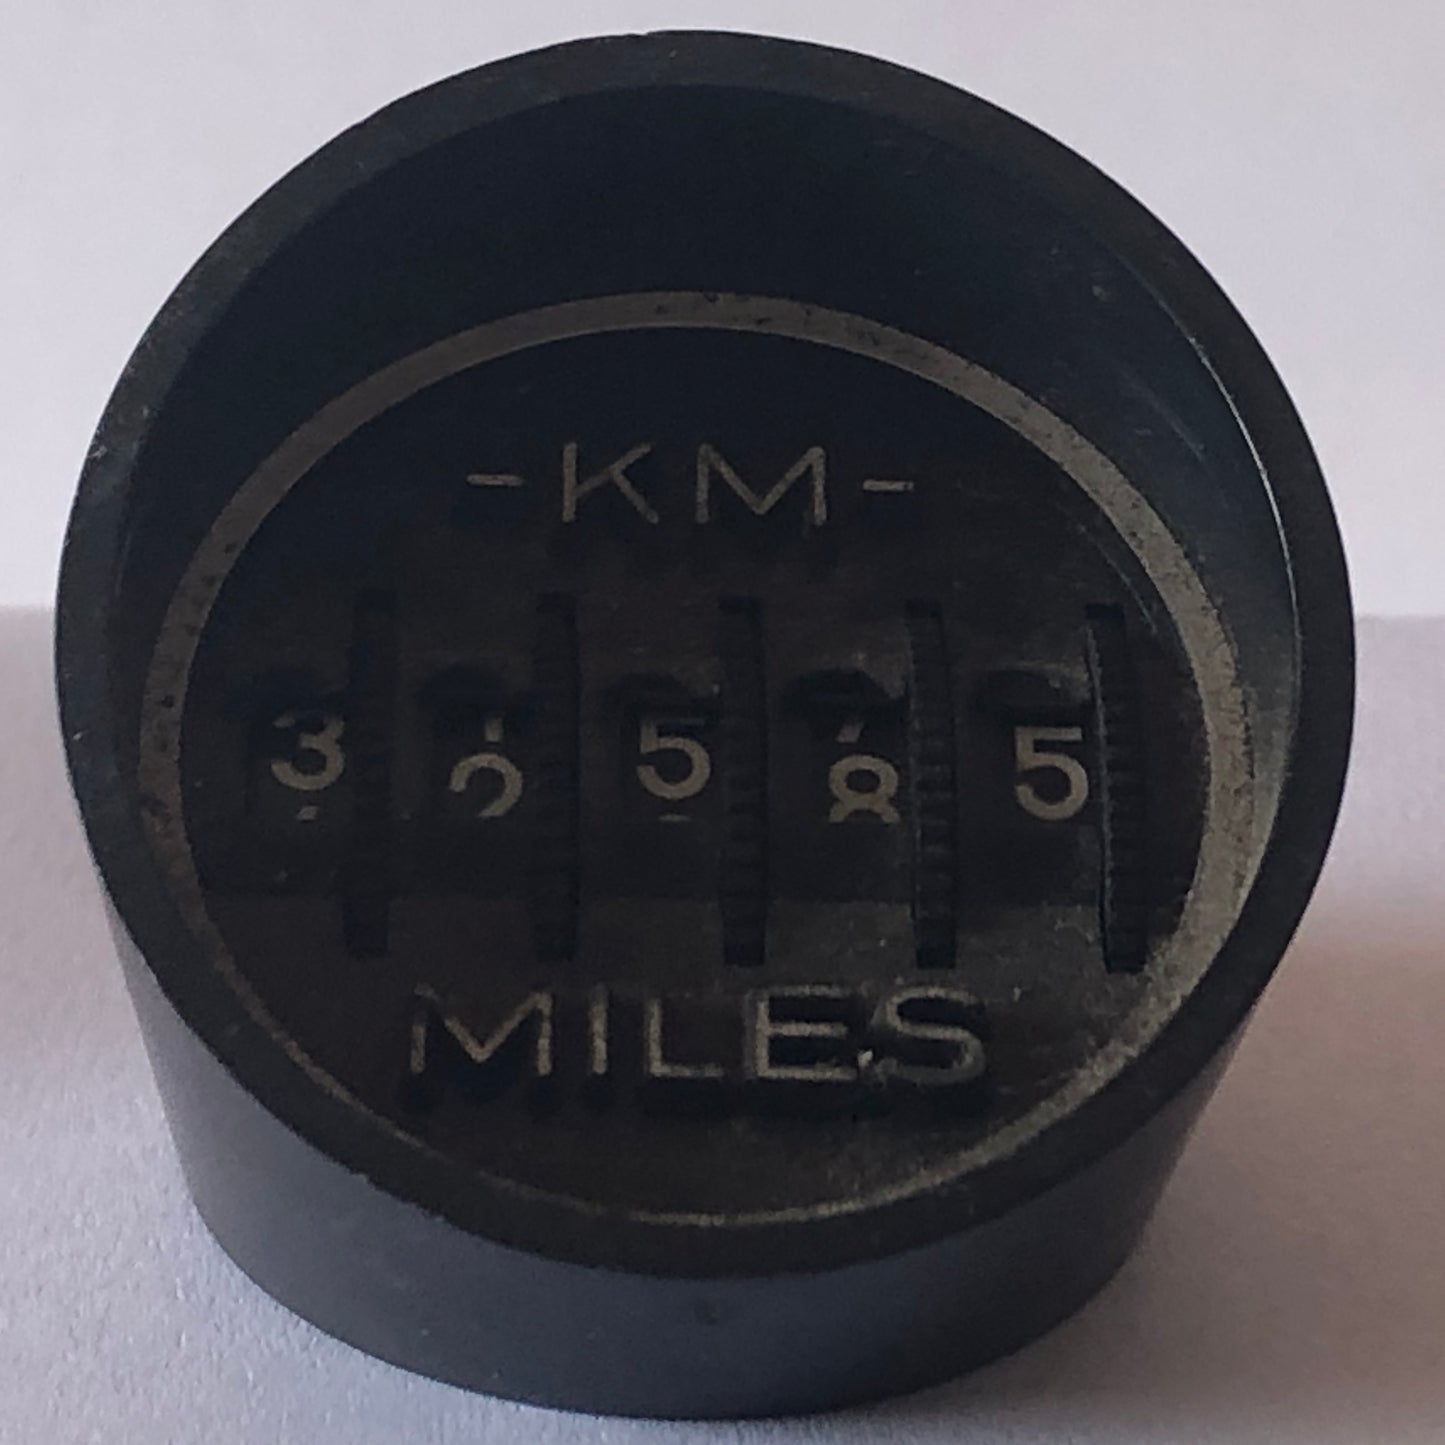 Automobilia, Vintage Manual Km and Mile Counter with Magnet